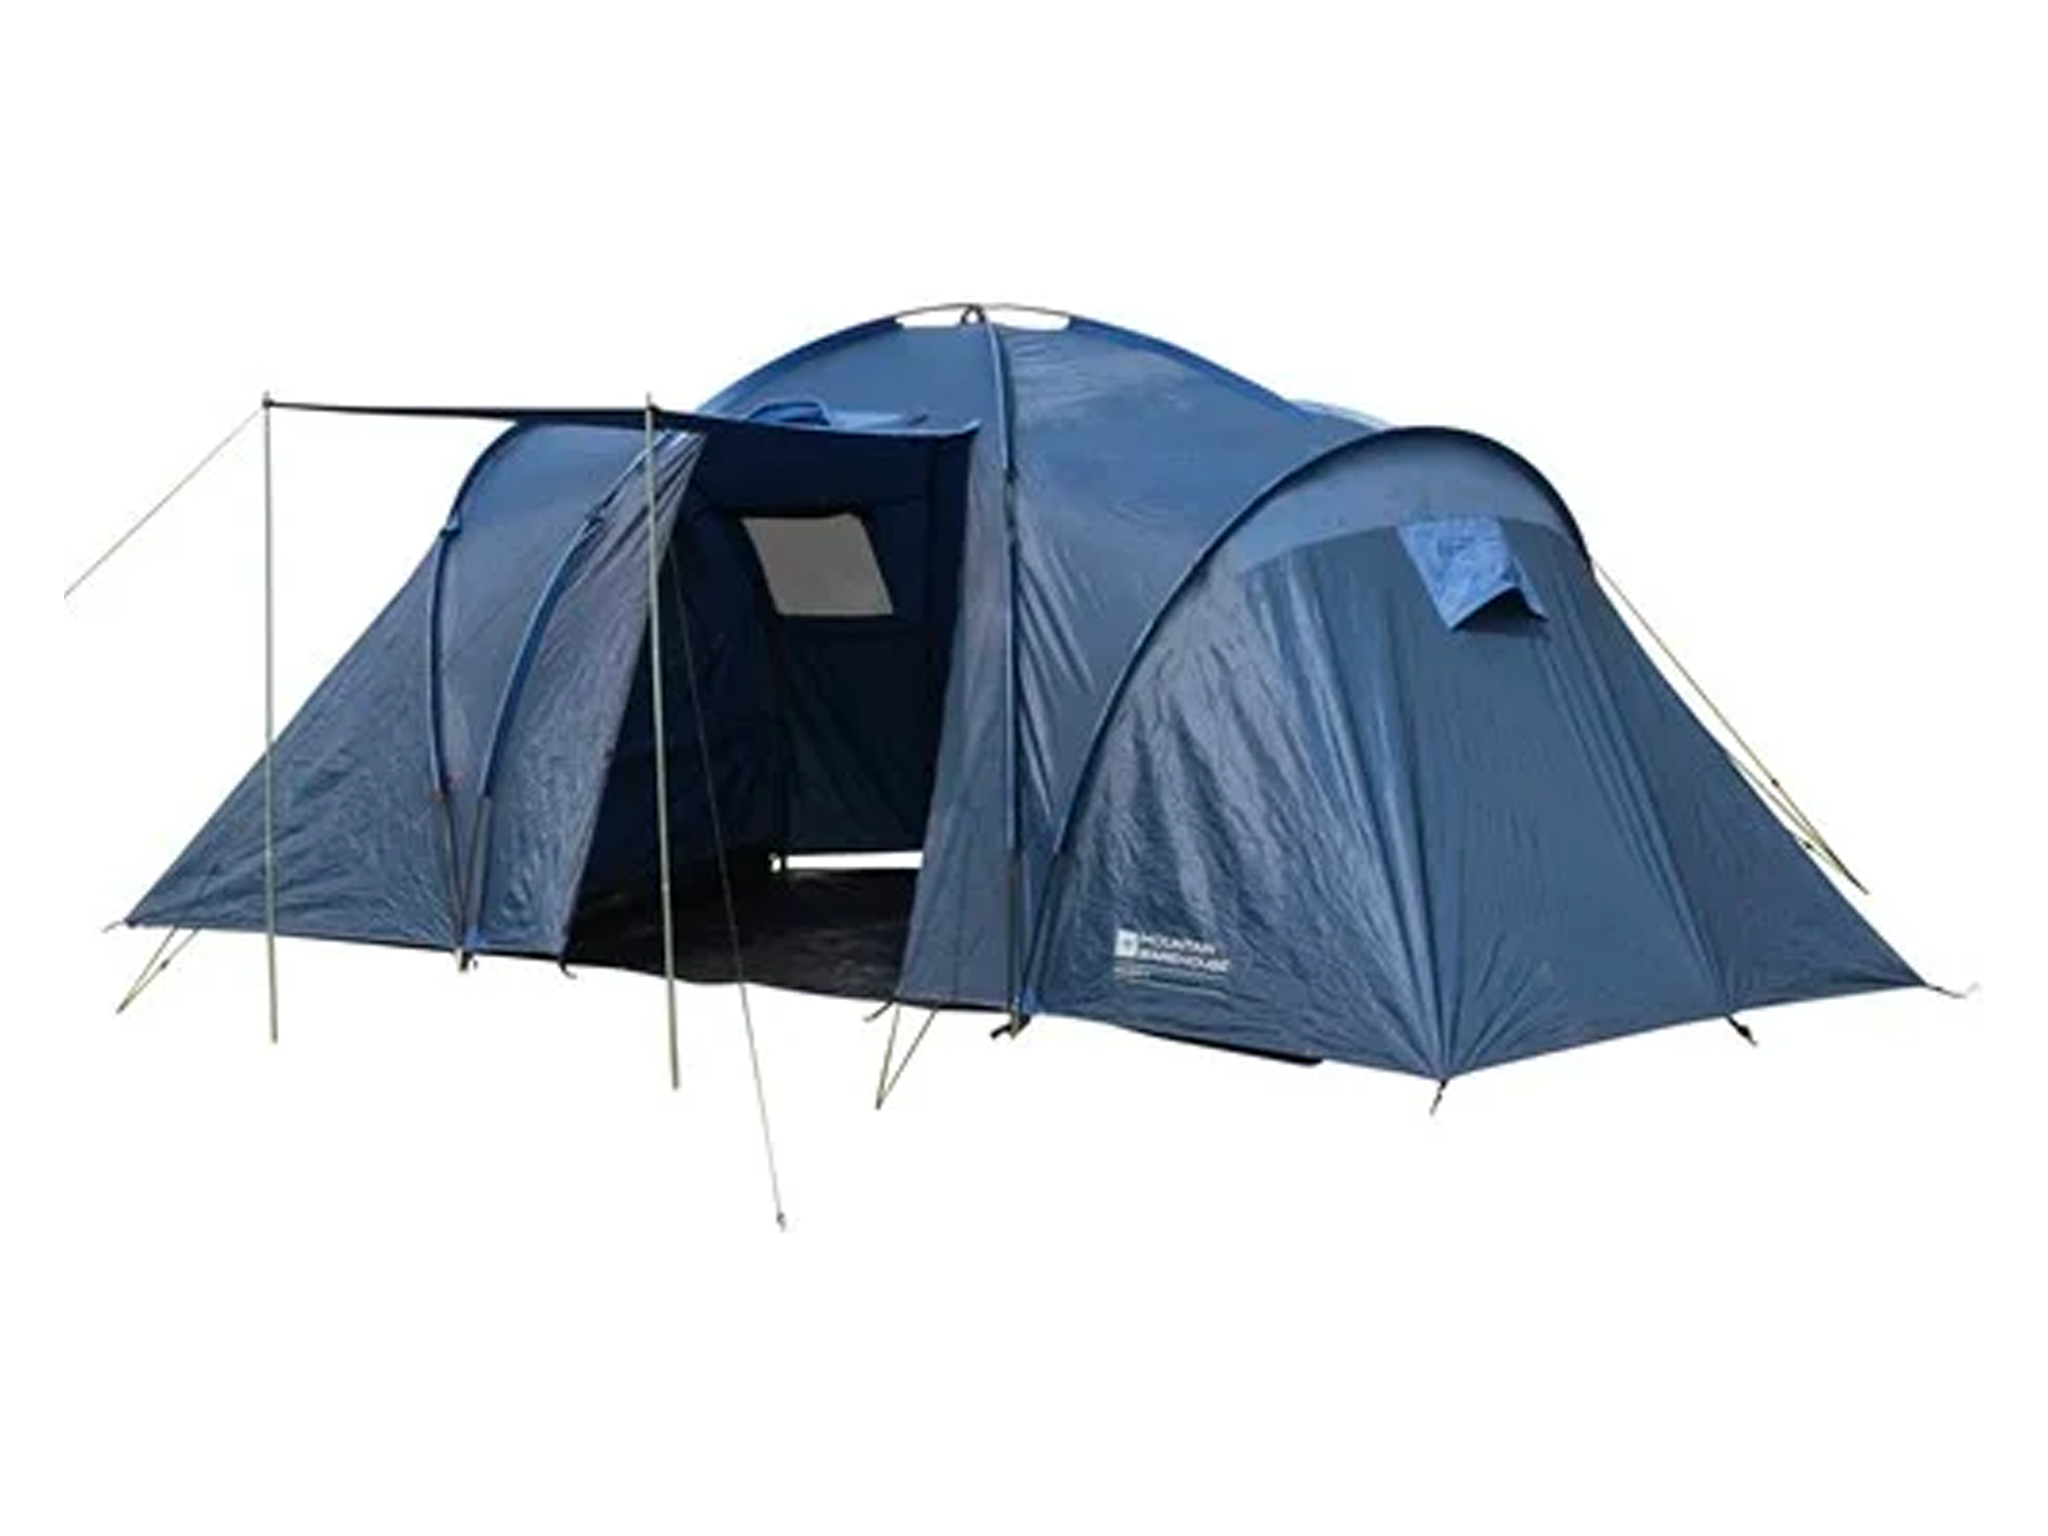 Mountain-warehouse-6-man-tent-indybest